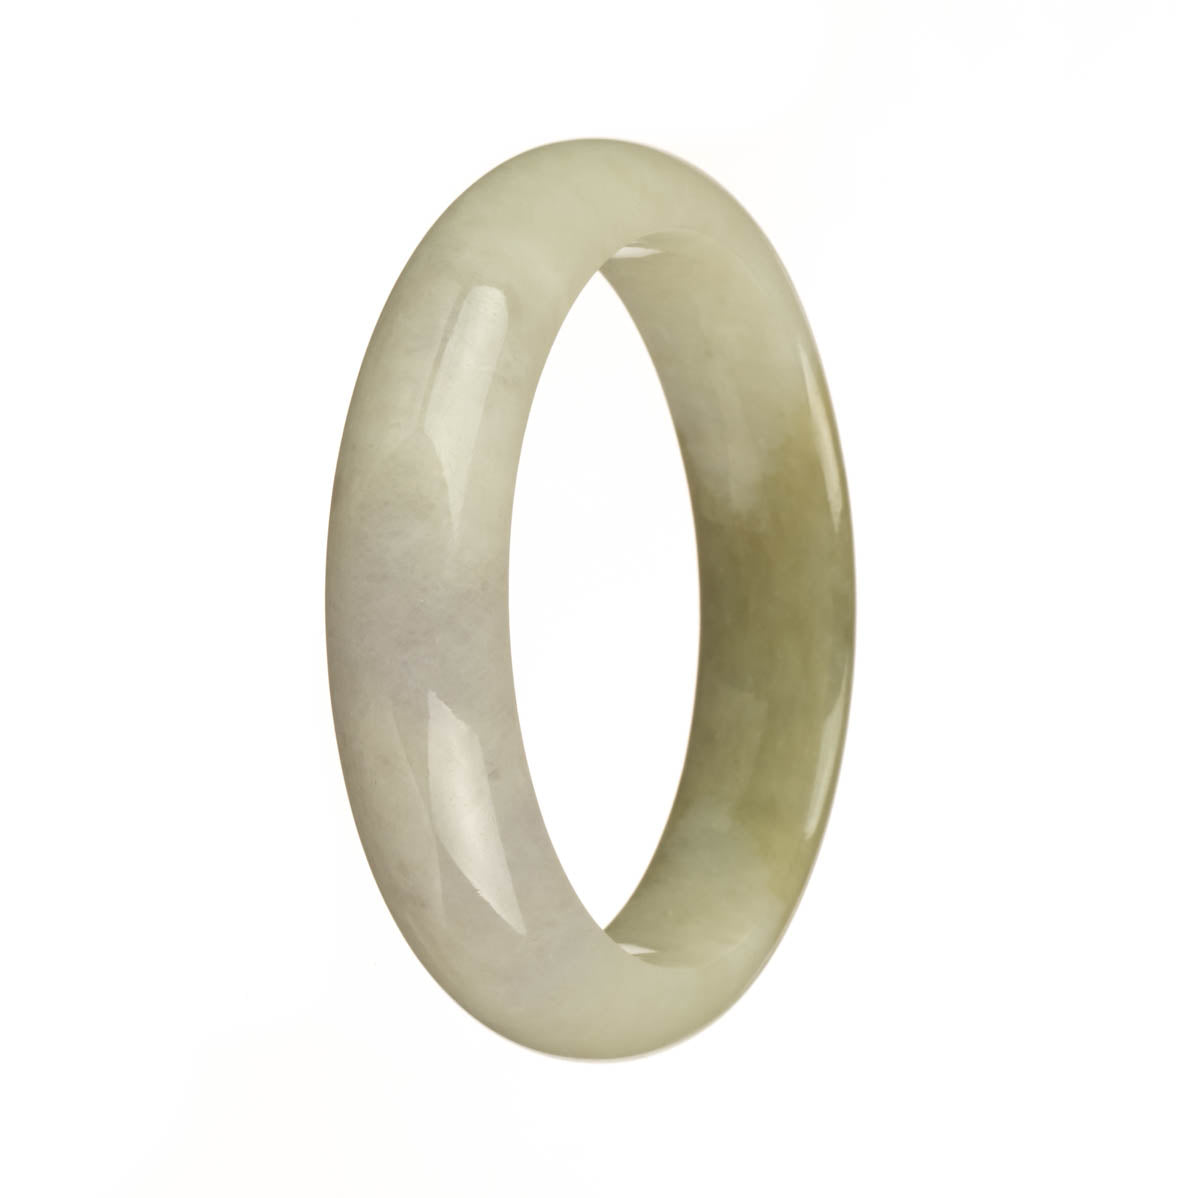 A close-up photo of a Real Grade A White and Olive Green Jadeite Bangle. The bangle is 57mm in size and has a half moon shape. It is a luxurious piece of jewelry designed by MAYS™.